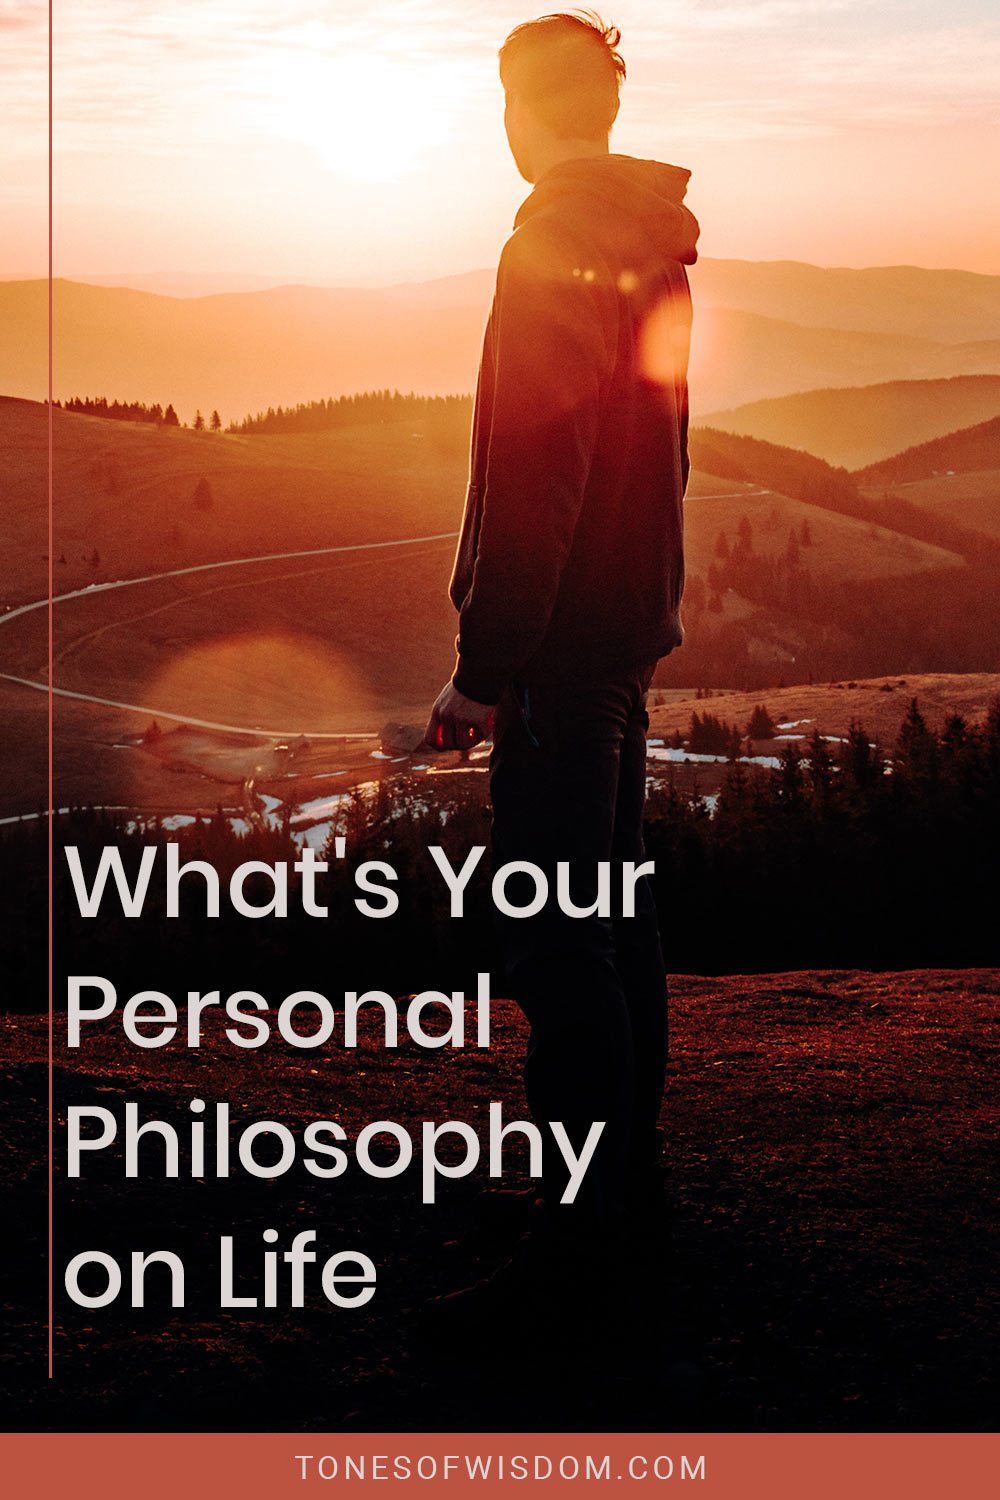 What’s Your Personal Philosophy on Life